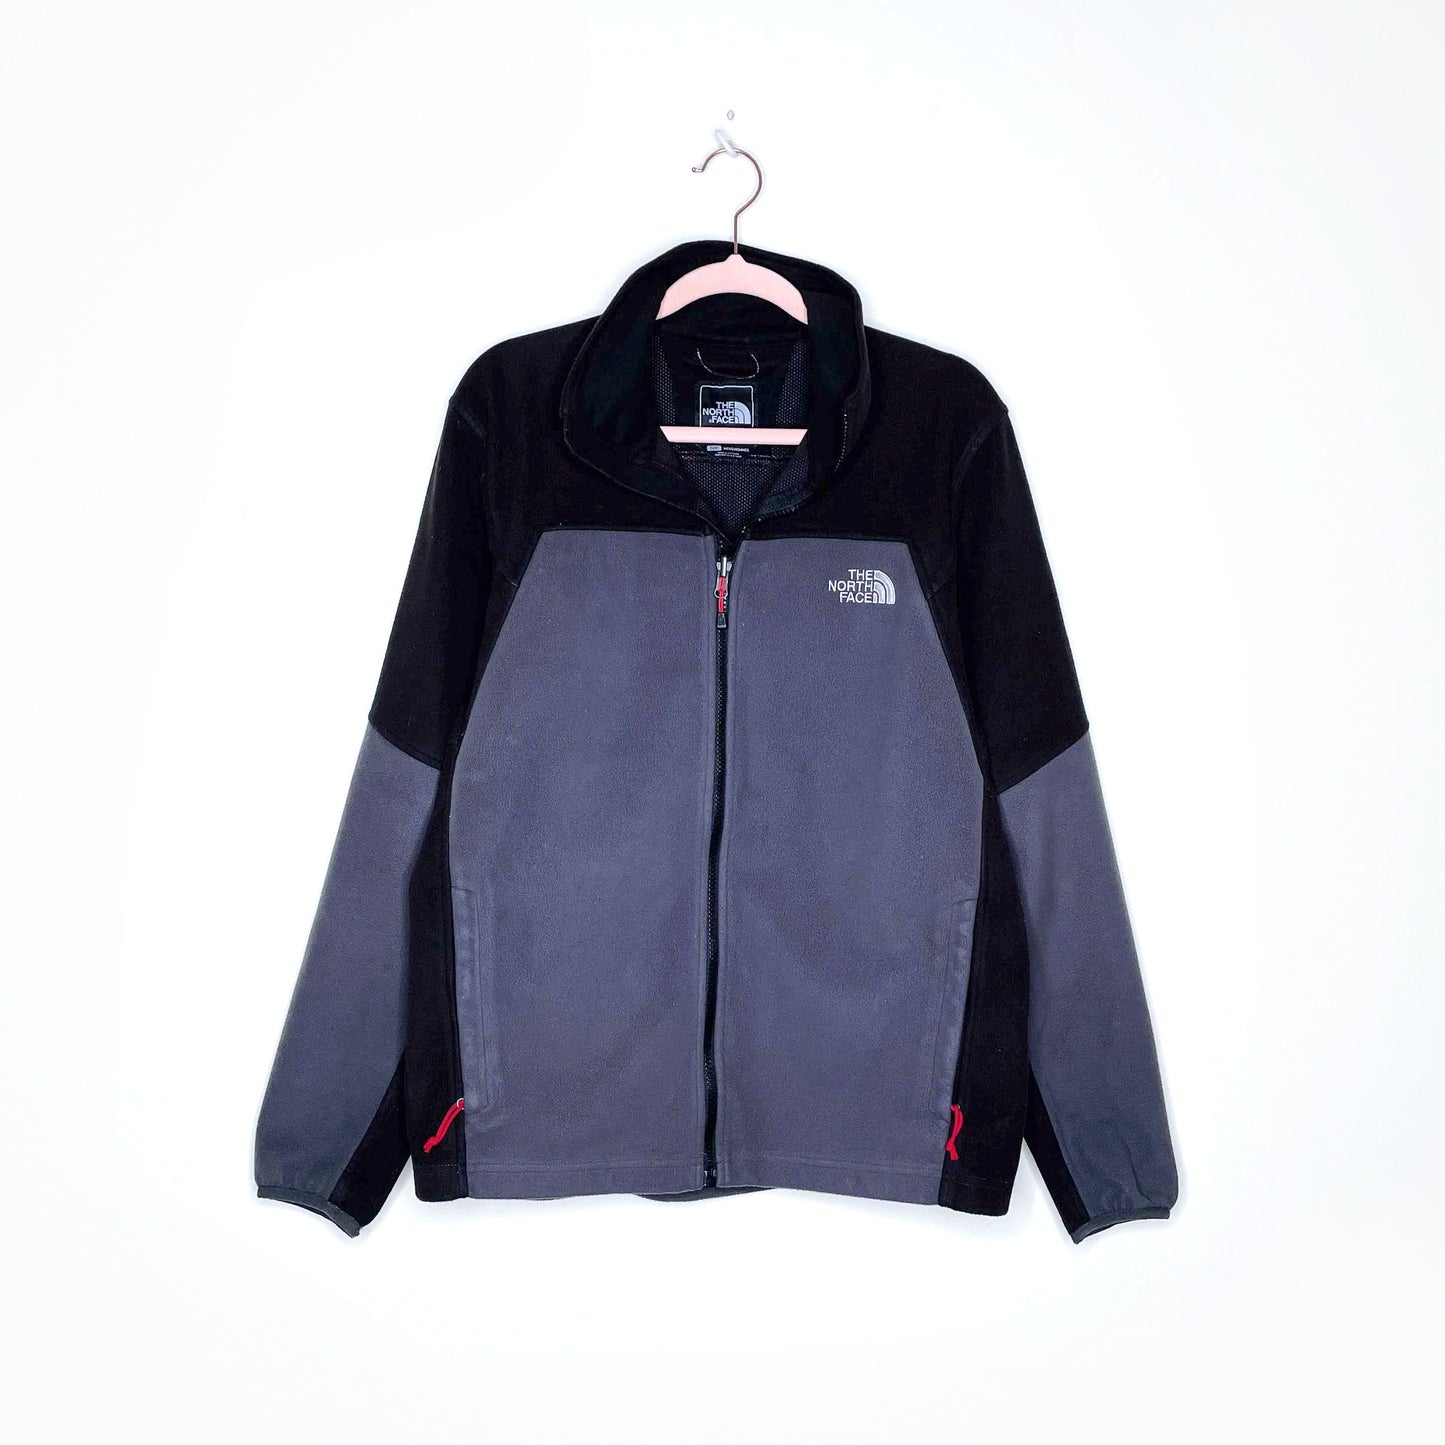 the north face soft shell fleece jacket - size small